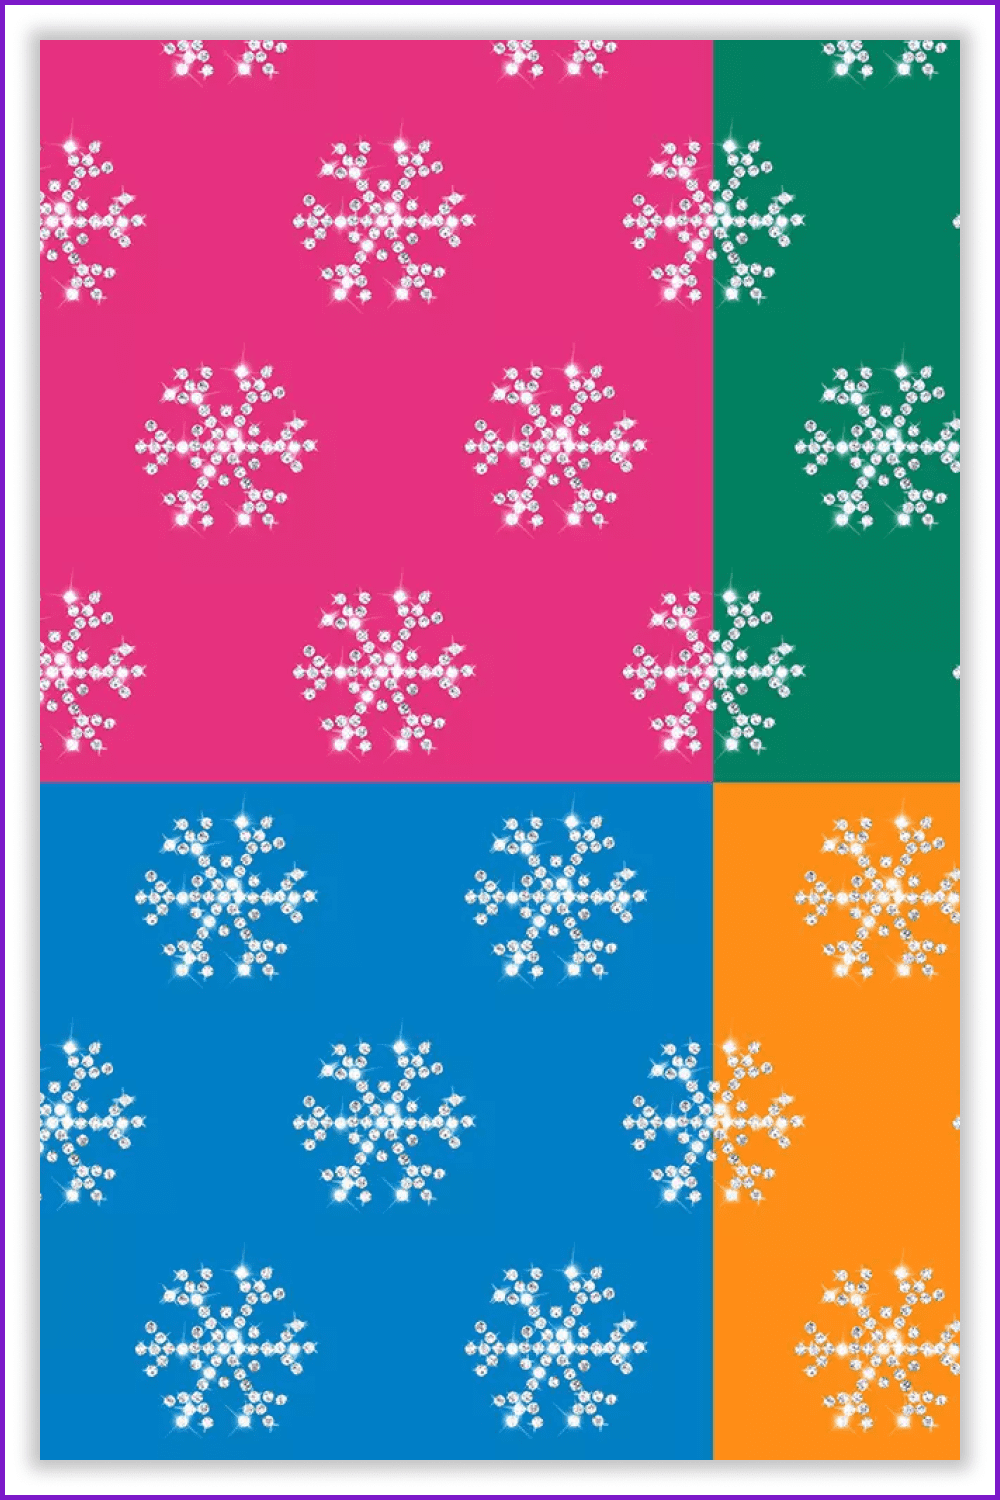 Images of white snowflakes on a multi-colored background.